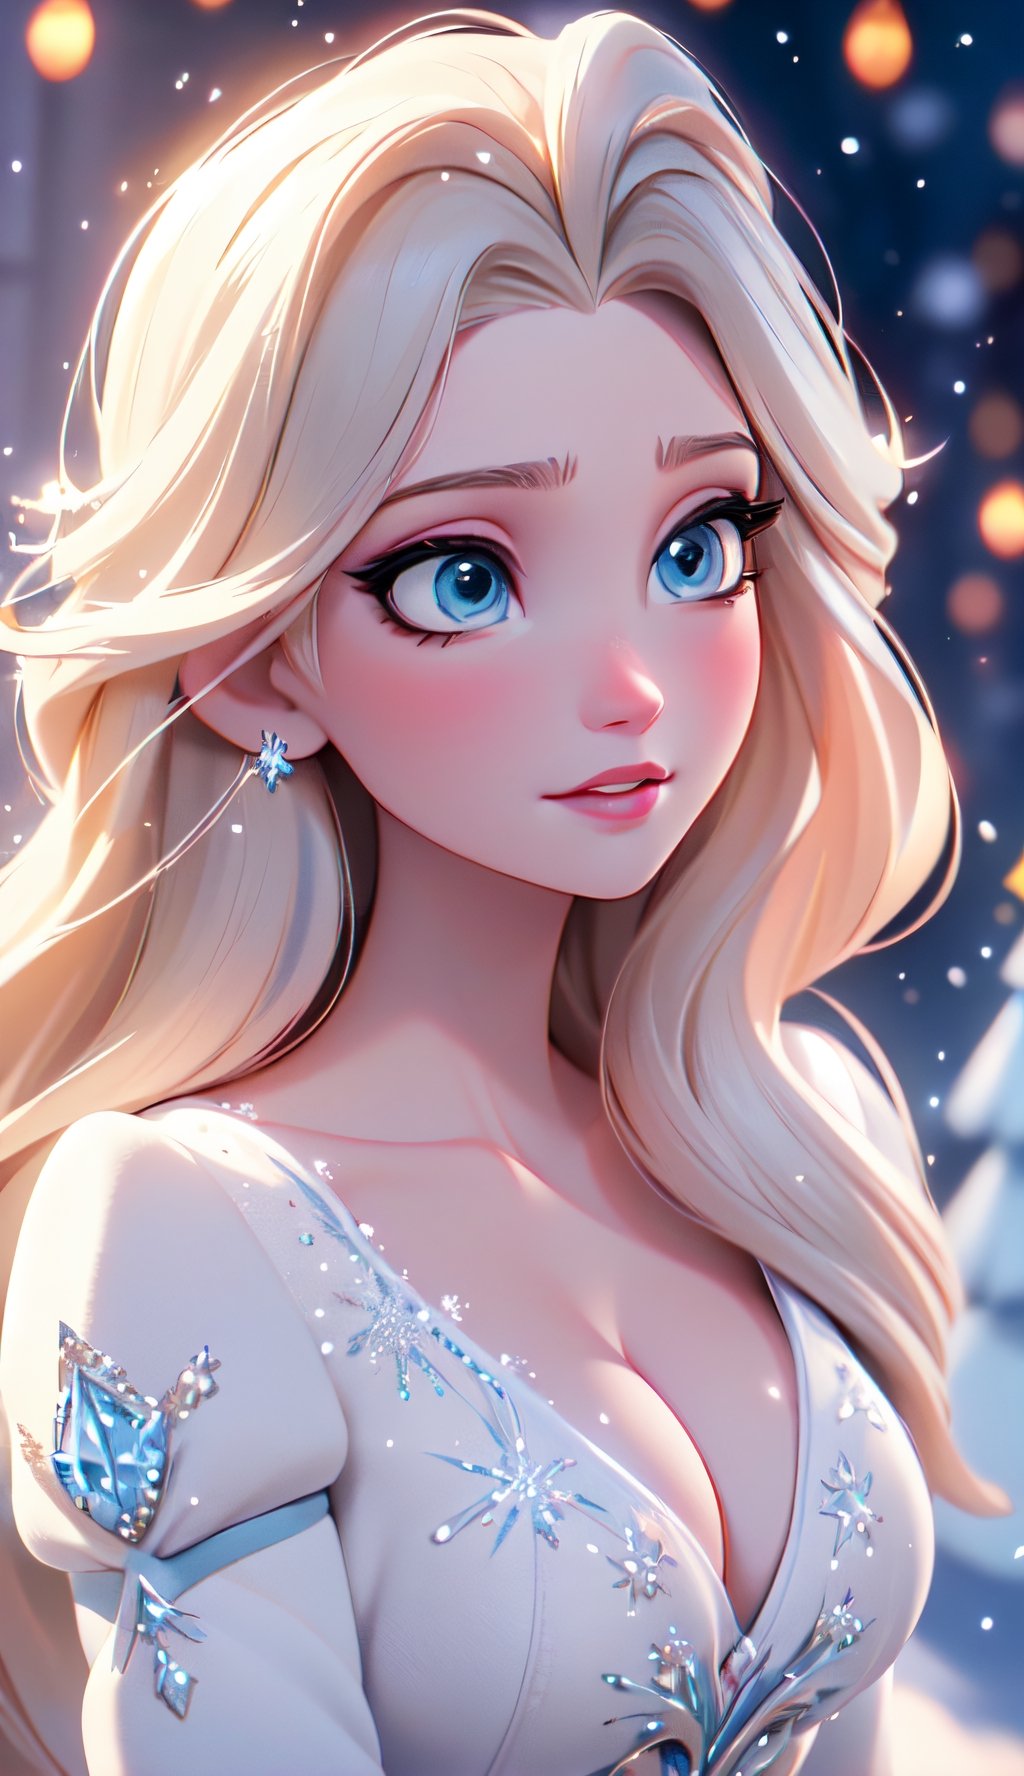 close up of face, Elsa from Frozen, (best quality, masterpiece, ultra detailed, highres, RAW image), perfect facial features, pale skin, blushing, blonde, long tousled hair, perfect eyes, perfect proportions, prestigeous, delicate, romantic, Elizabethan woman, winter christmas clothes, cleavage, romanticism, hirao style, snowy Christmas village in far background, snow field, pine trees, mountains, sunlight from above to give heavenly feeling, glitter, (falling snow), snowflakes, realistic.